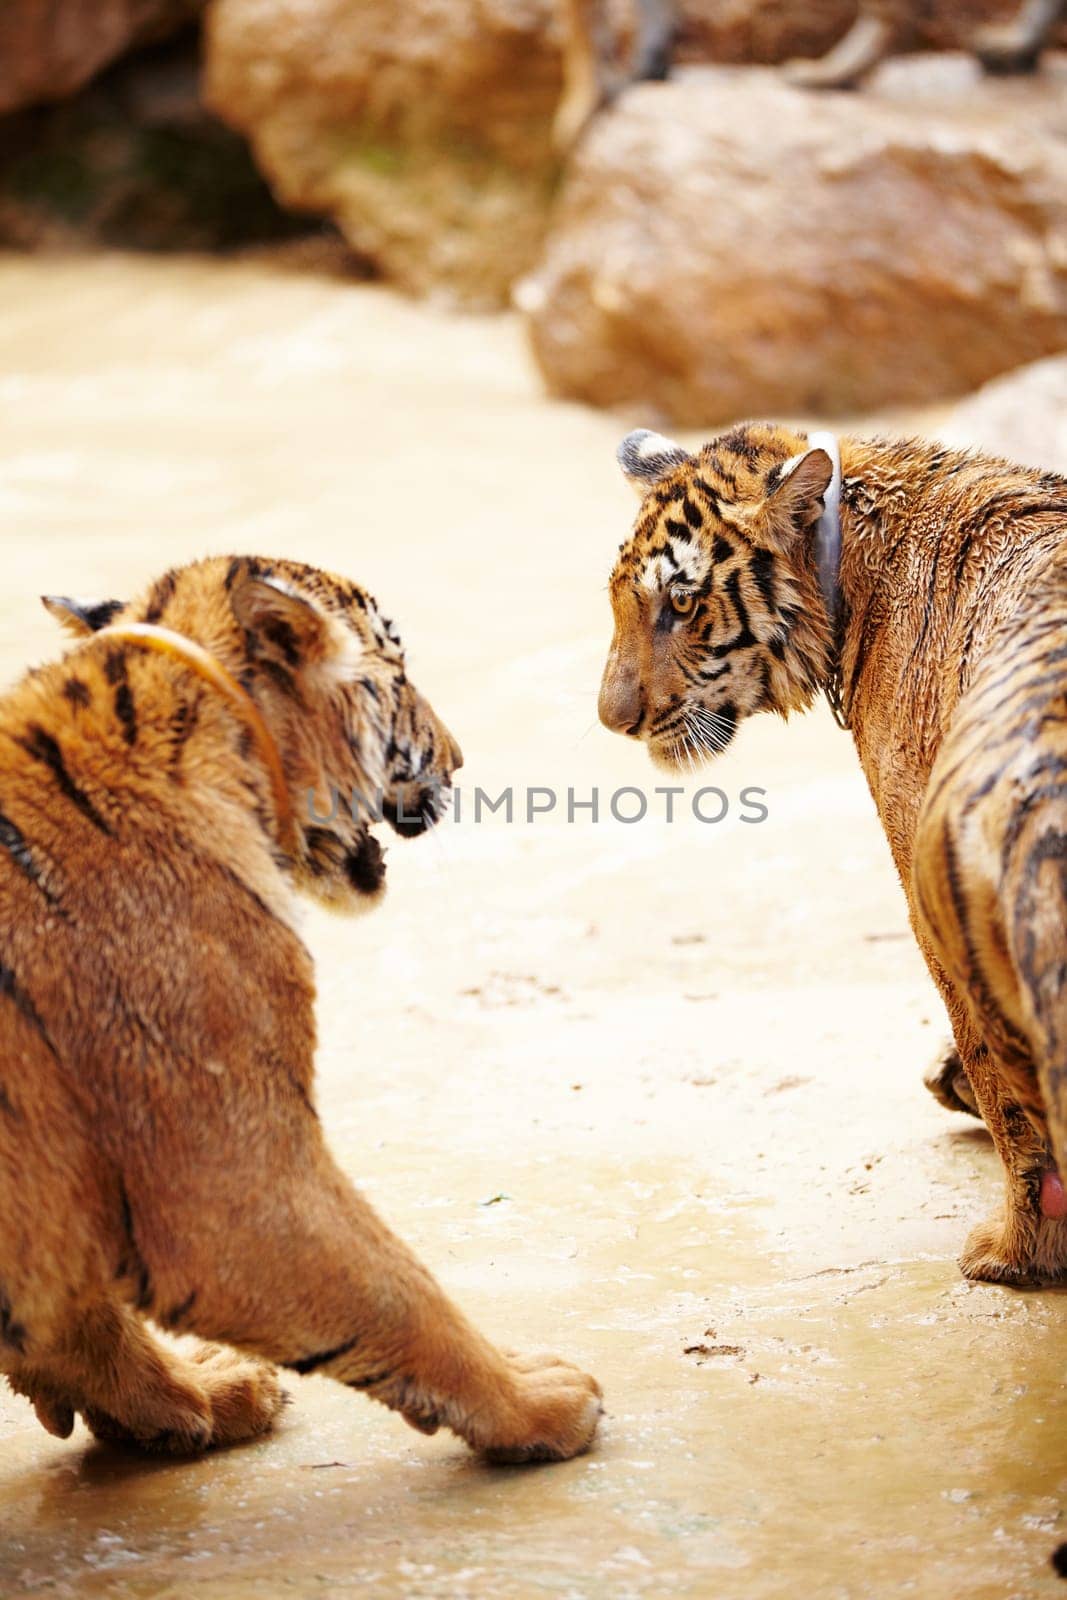 Nature, animals and tiger fight in zoo with playful cubs in mud with fun, endangered wildlife and water. Big cats playing together, park or river in Thailand for safari, outdoor action and power. by YuriArcurs